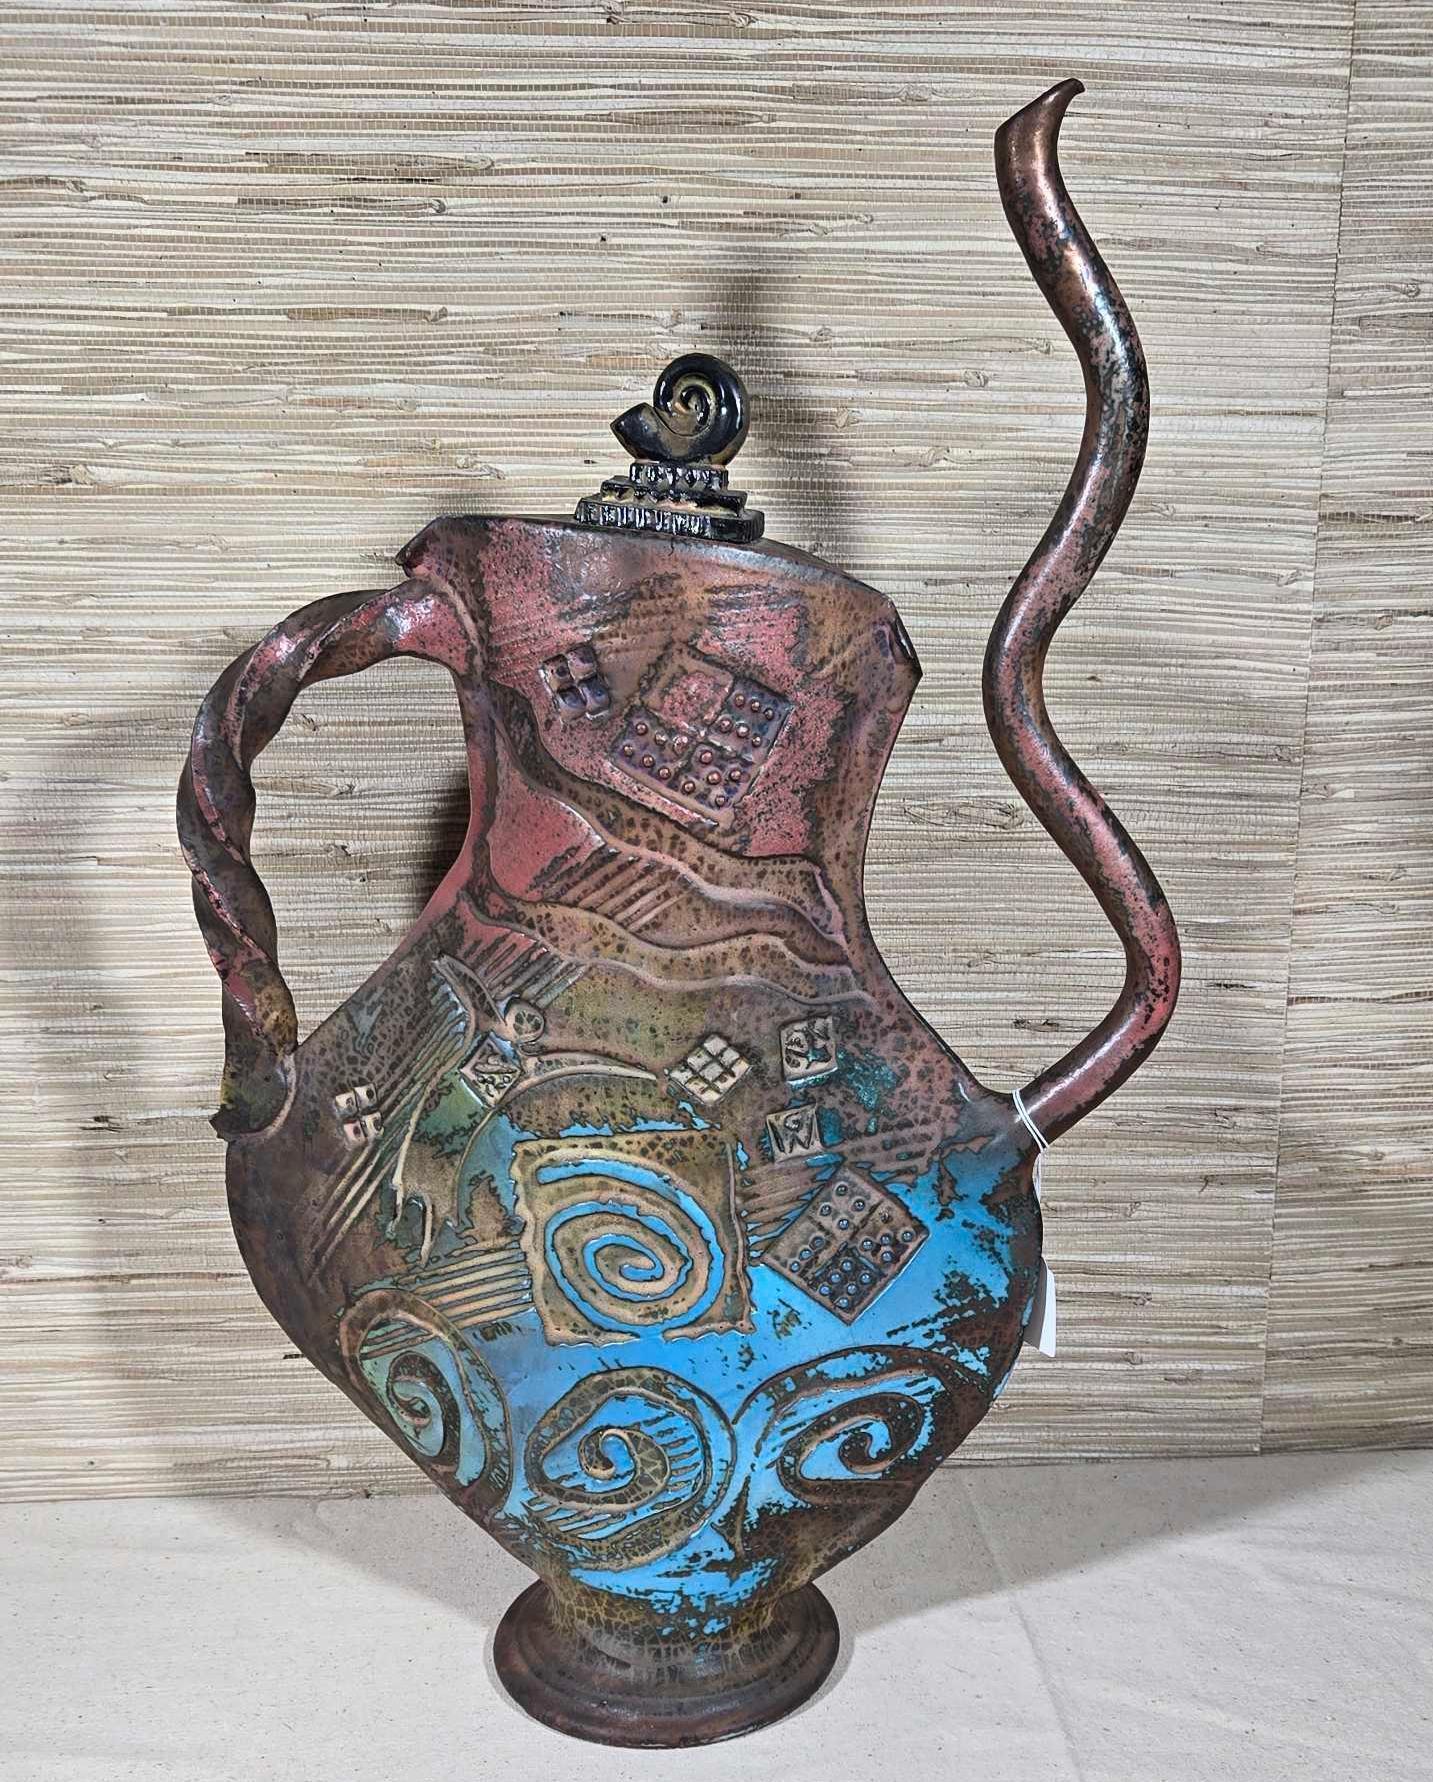 Fabulous Art Pottery Sculpture in the Form of a Teapot